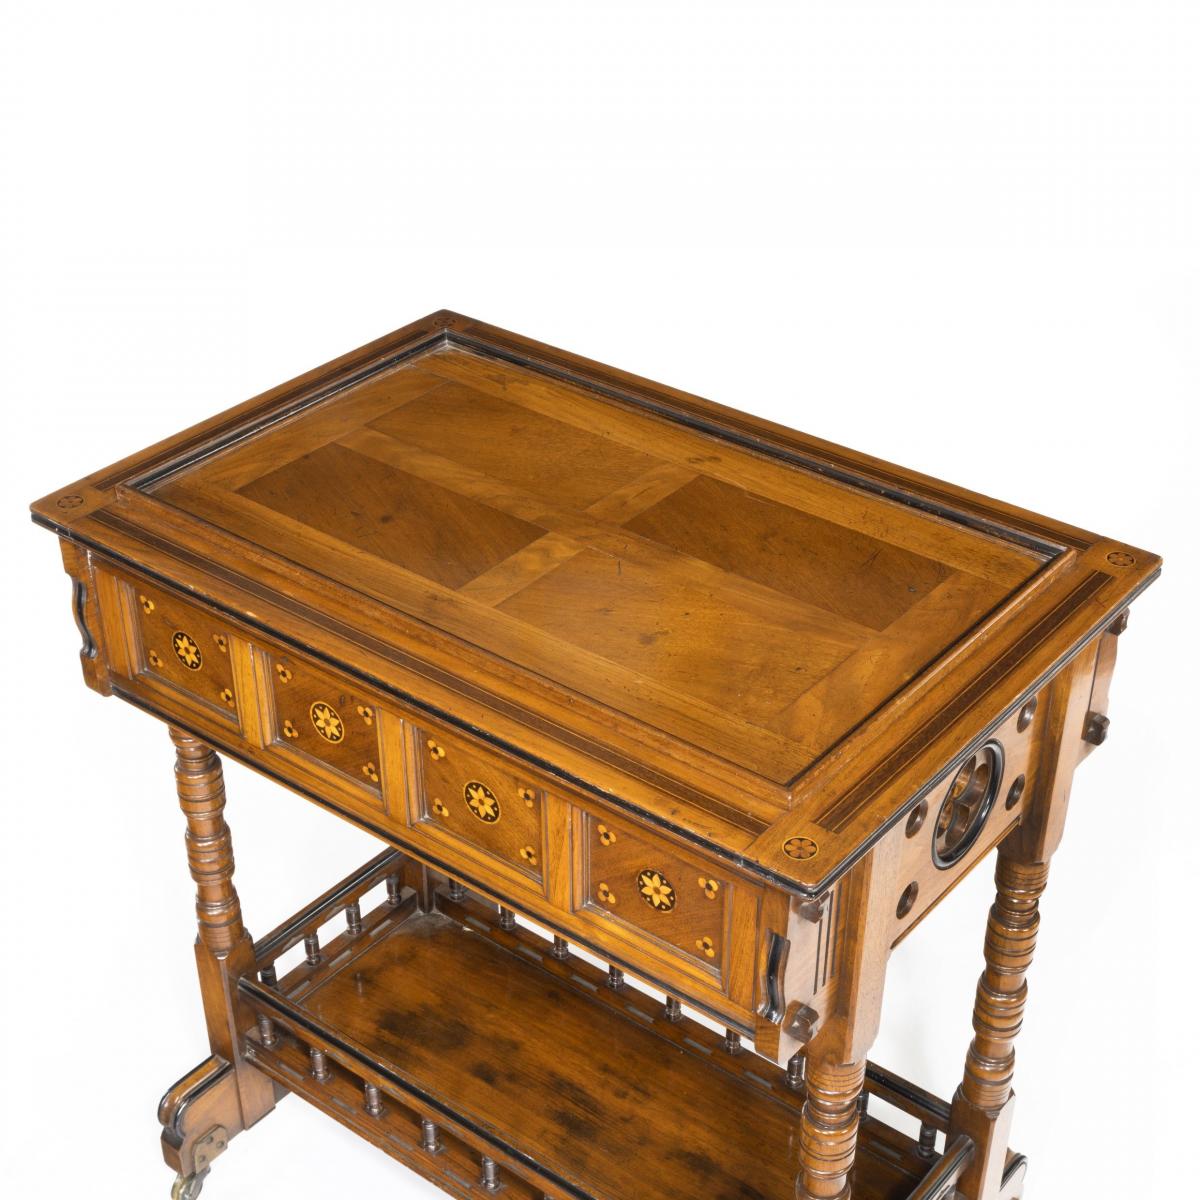 A walnut side table/jardinière by Gillows probably after Augustus Pugin